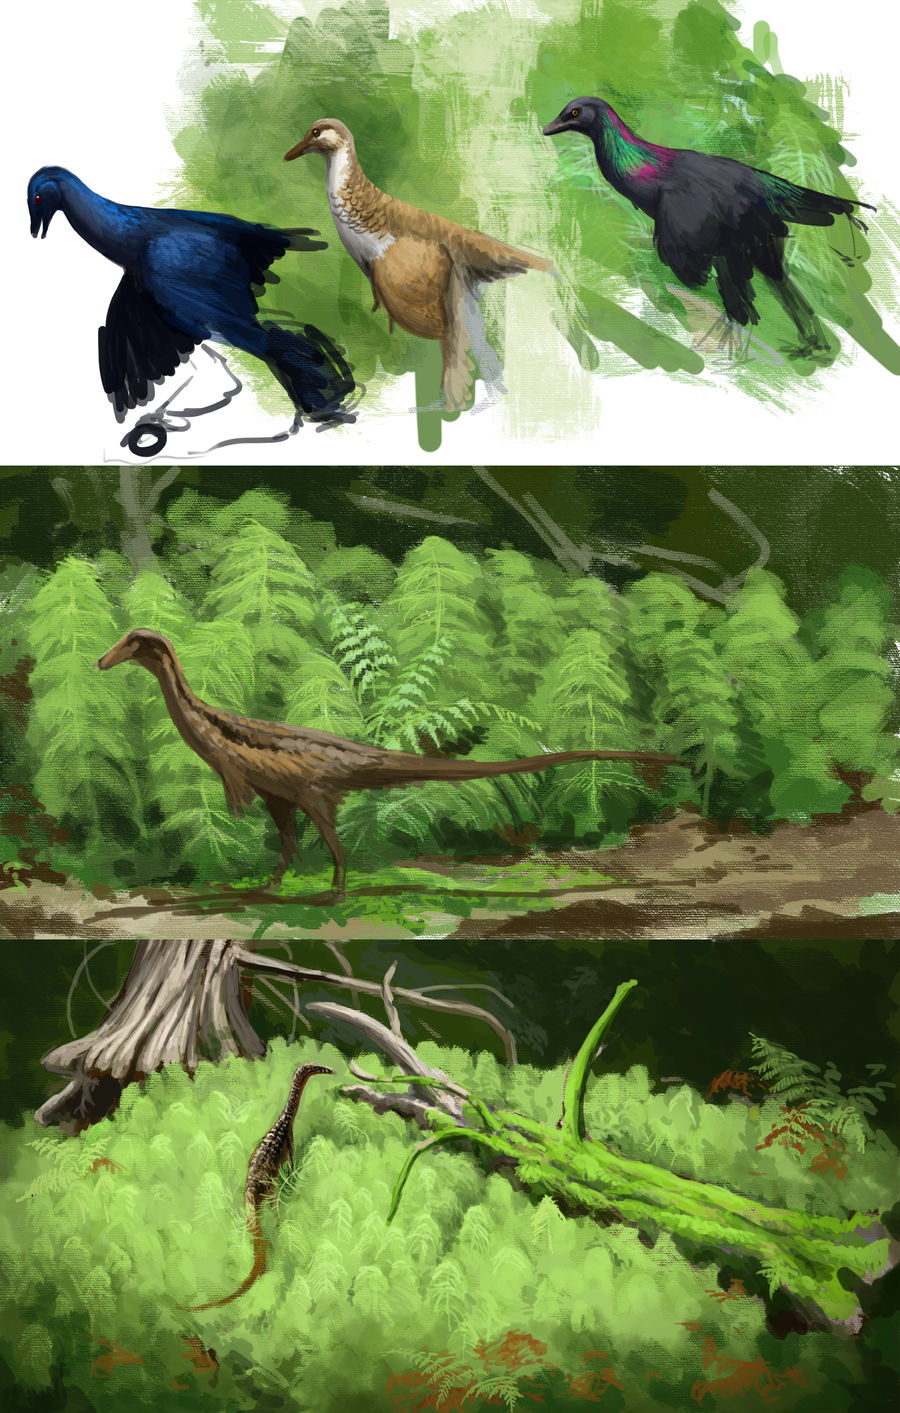 Speedpaint and sketches by Lucas-Attwell on DeviantArt